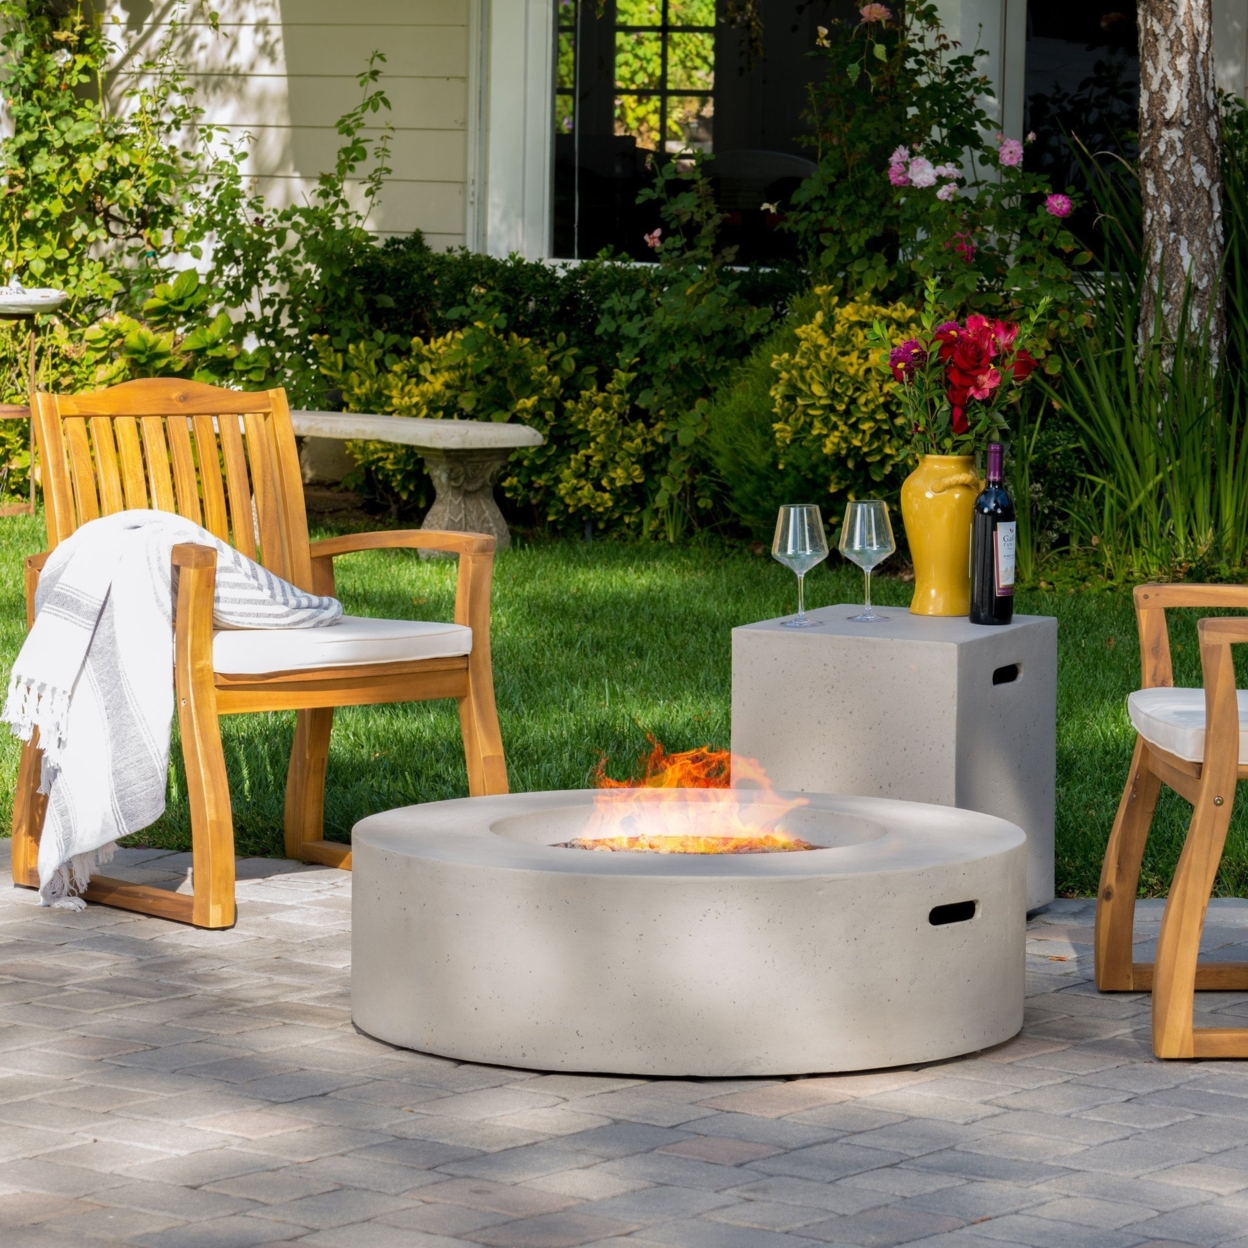 Hearth Circular 50K BTU Outdoor Gas Fire Pit Table With Tank Holder - Light Grey